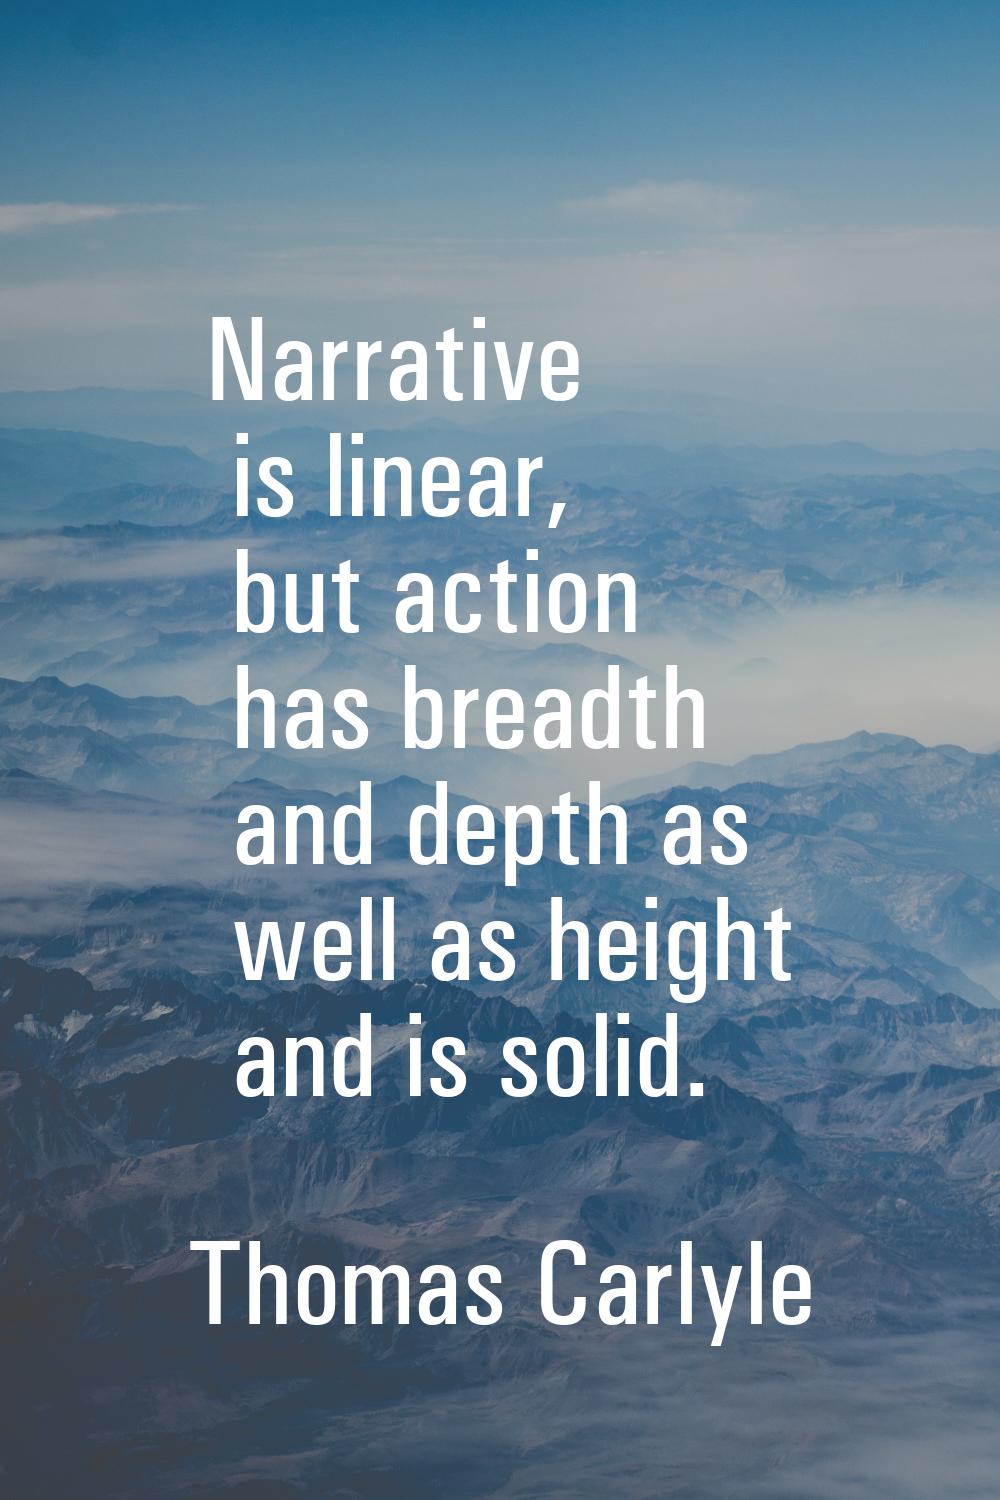 Narrative is linear, but action has breadth and depth as well as height and is solid.